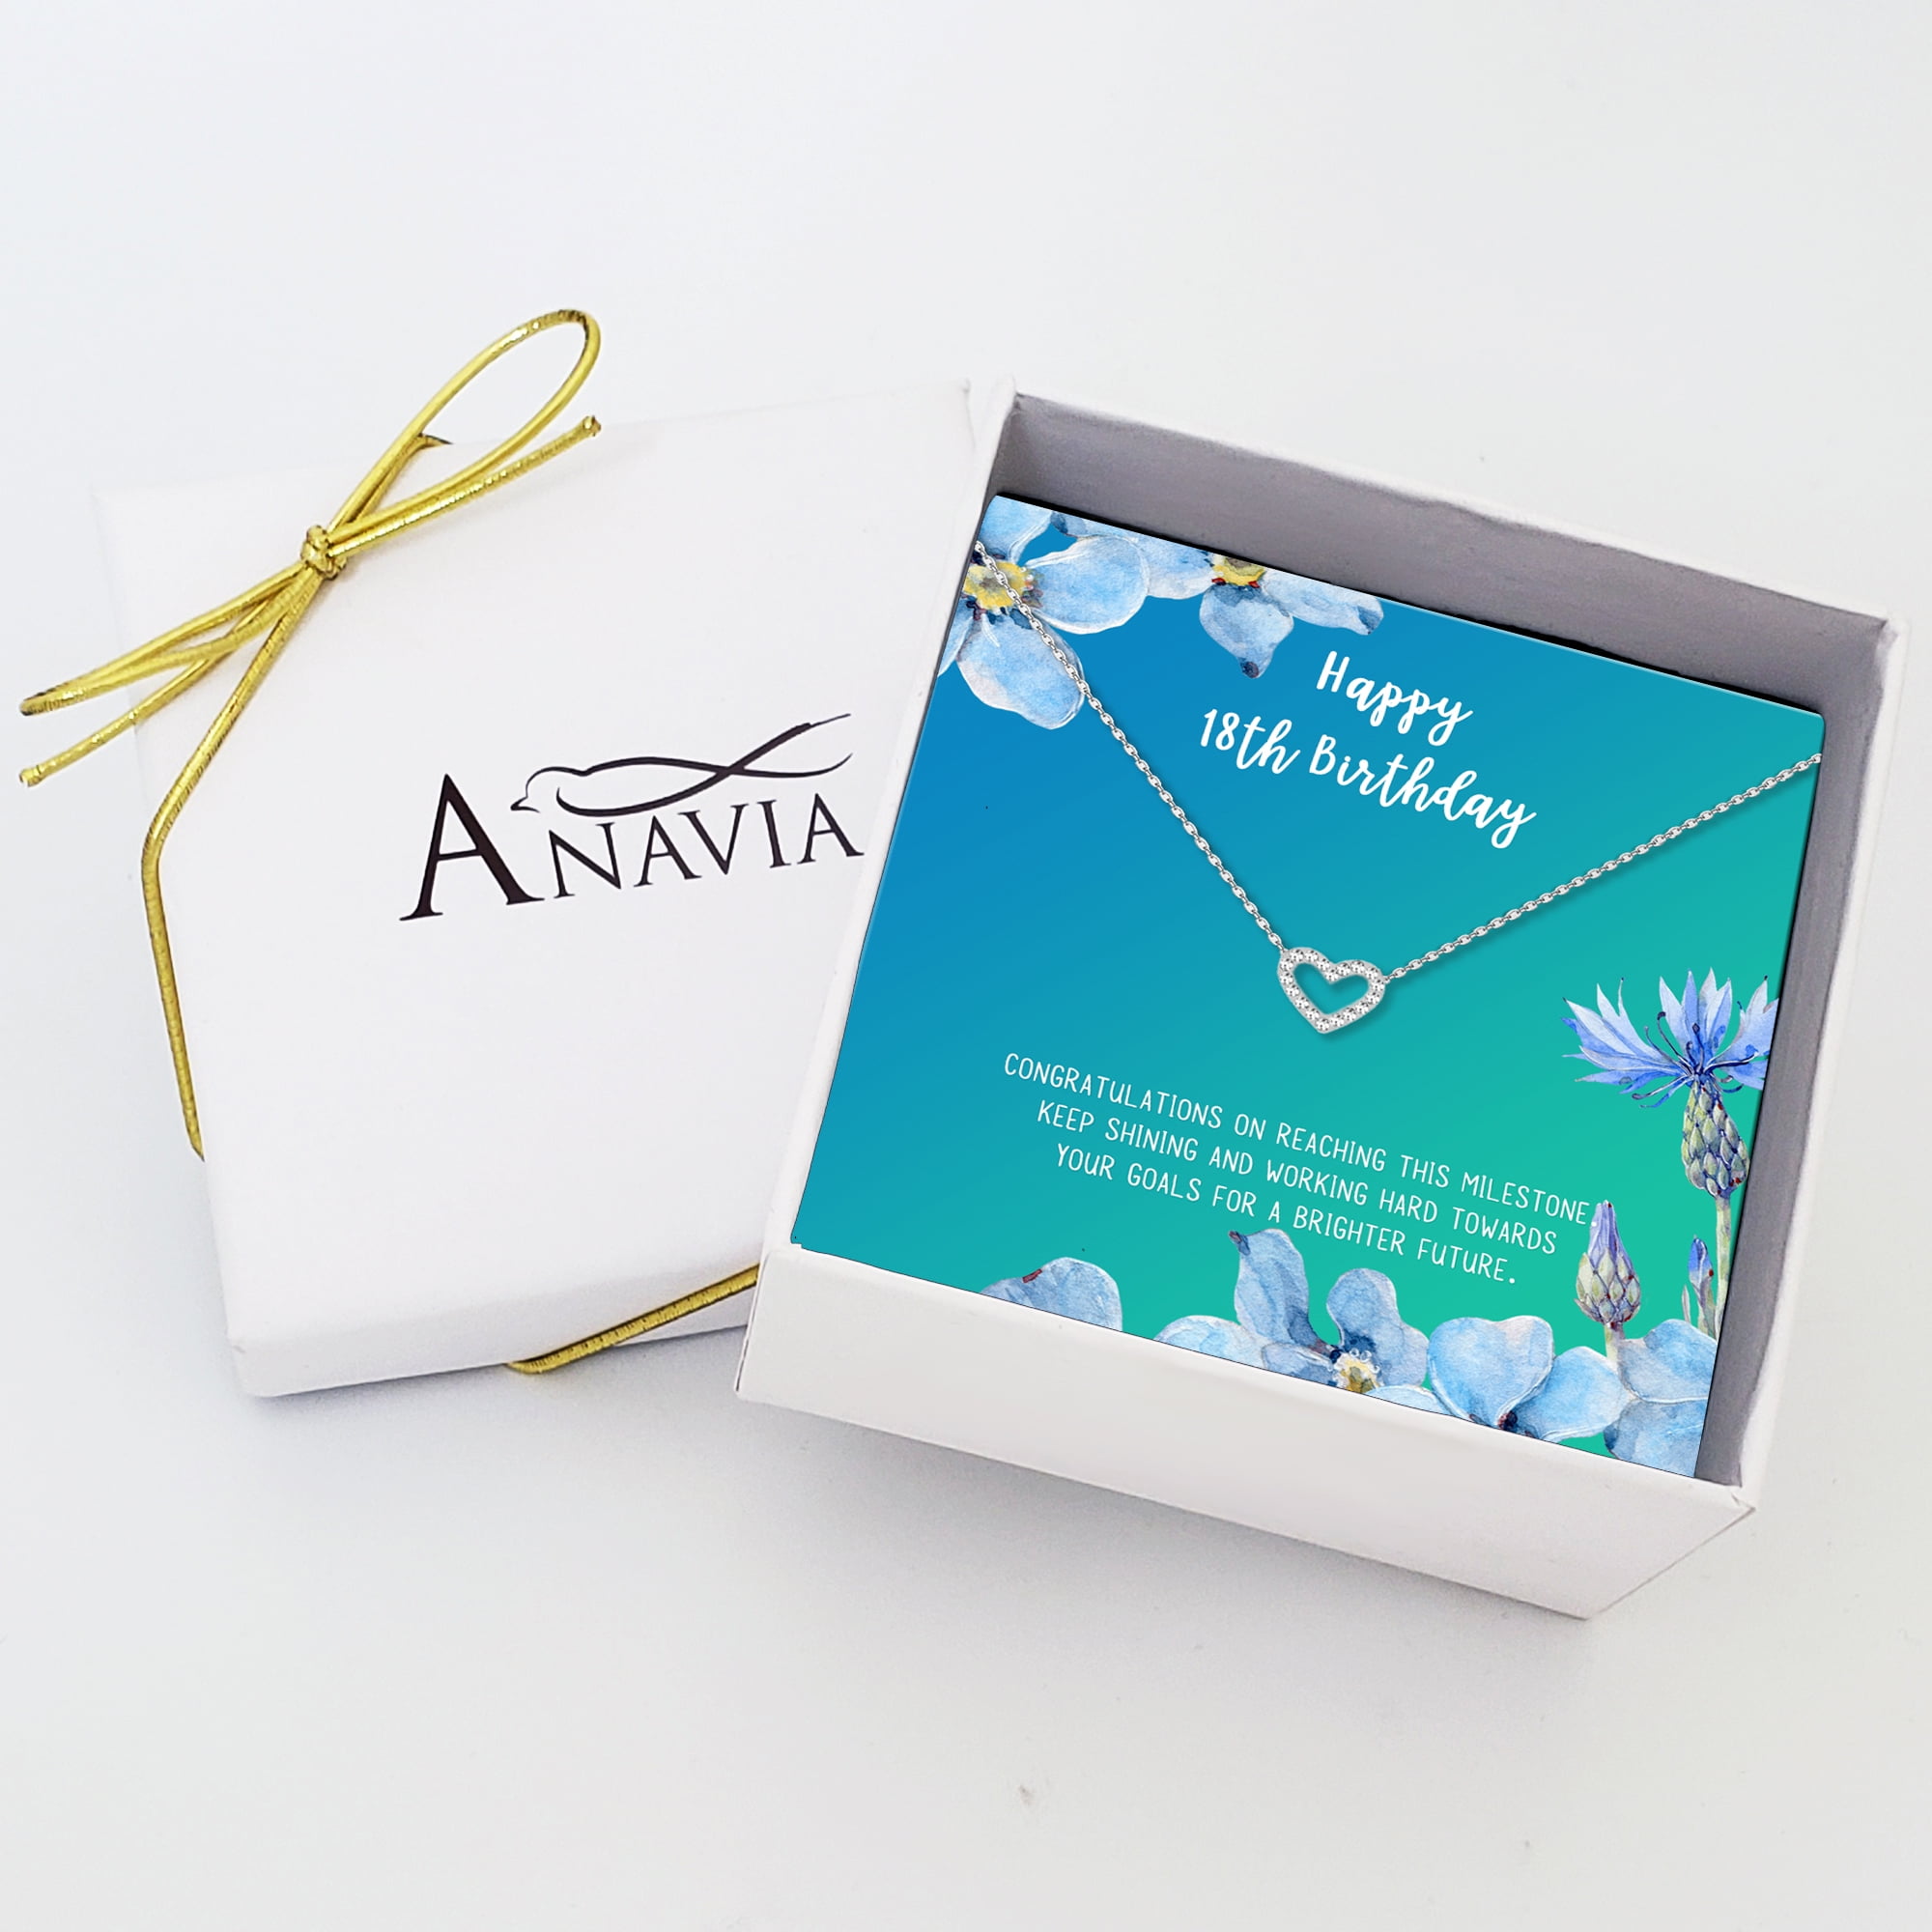 Anavia 18th Birthday Gifts for Girls, 925 Sterling Silver 18 Beads